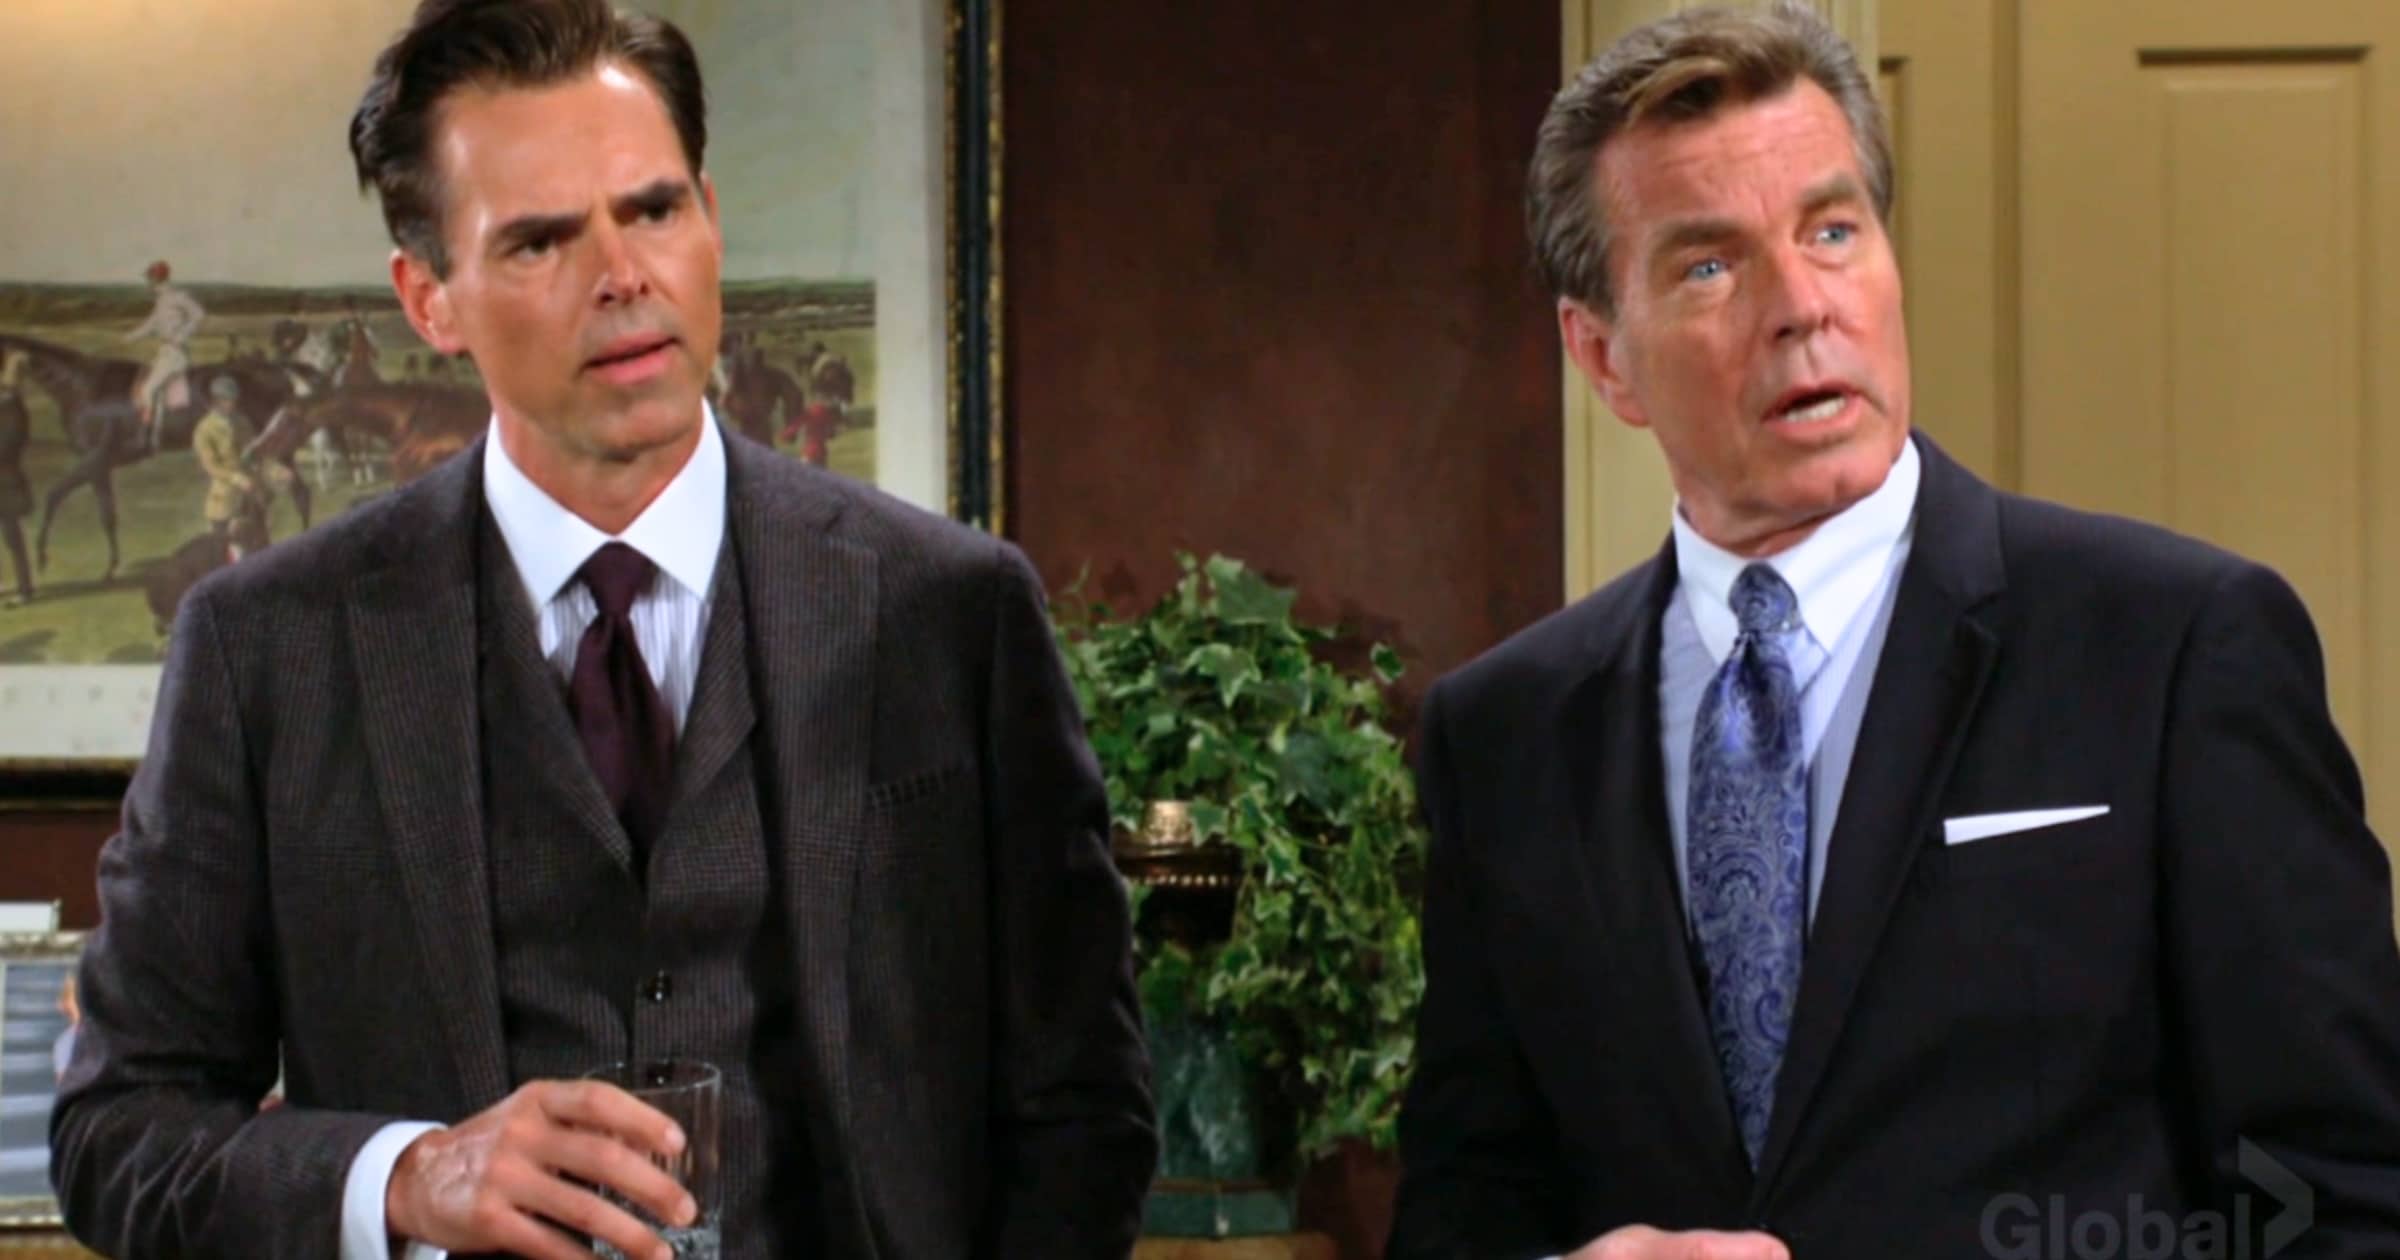 The Young and the Restless - Nov 3 - Billy and Jack